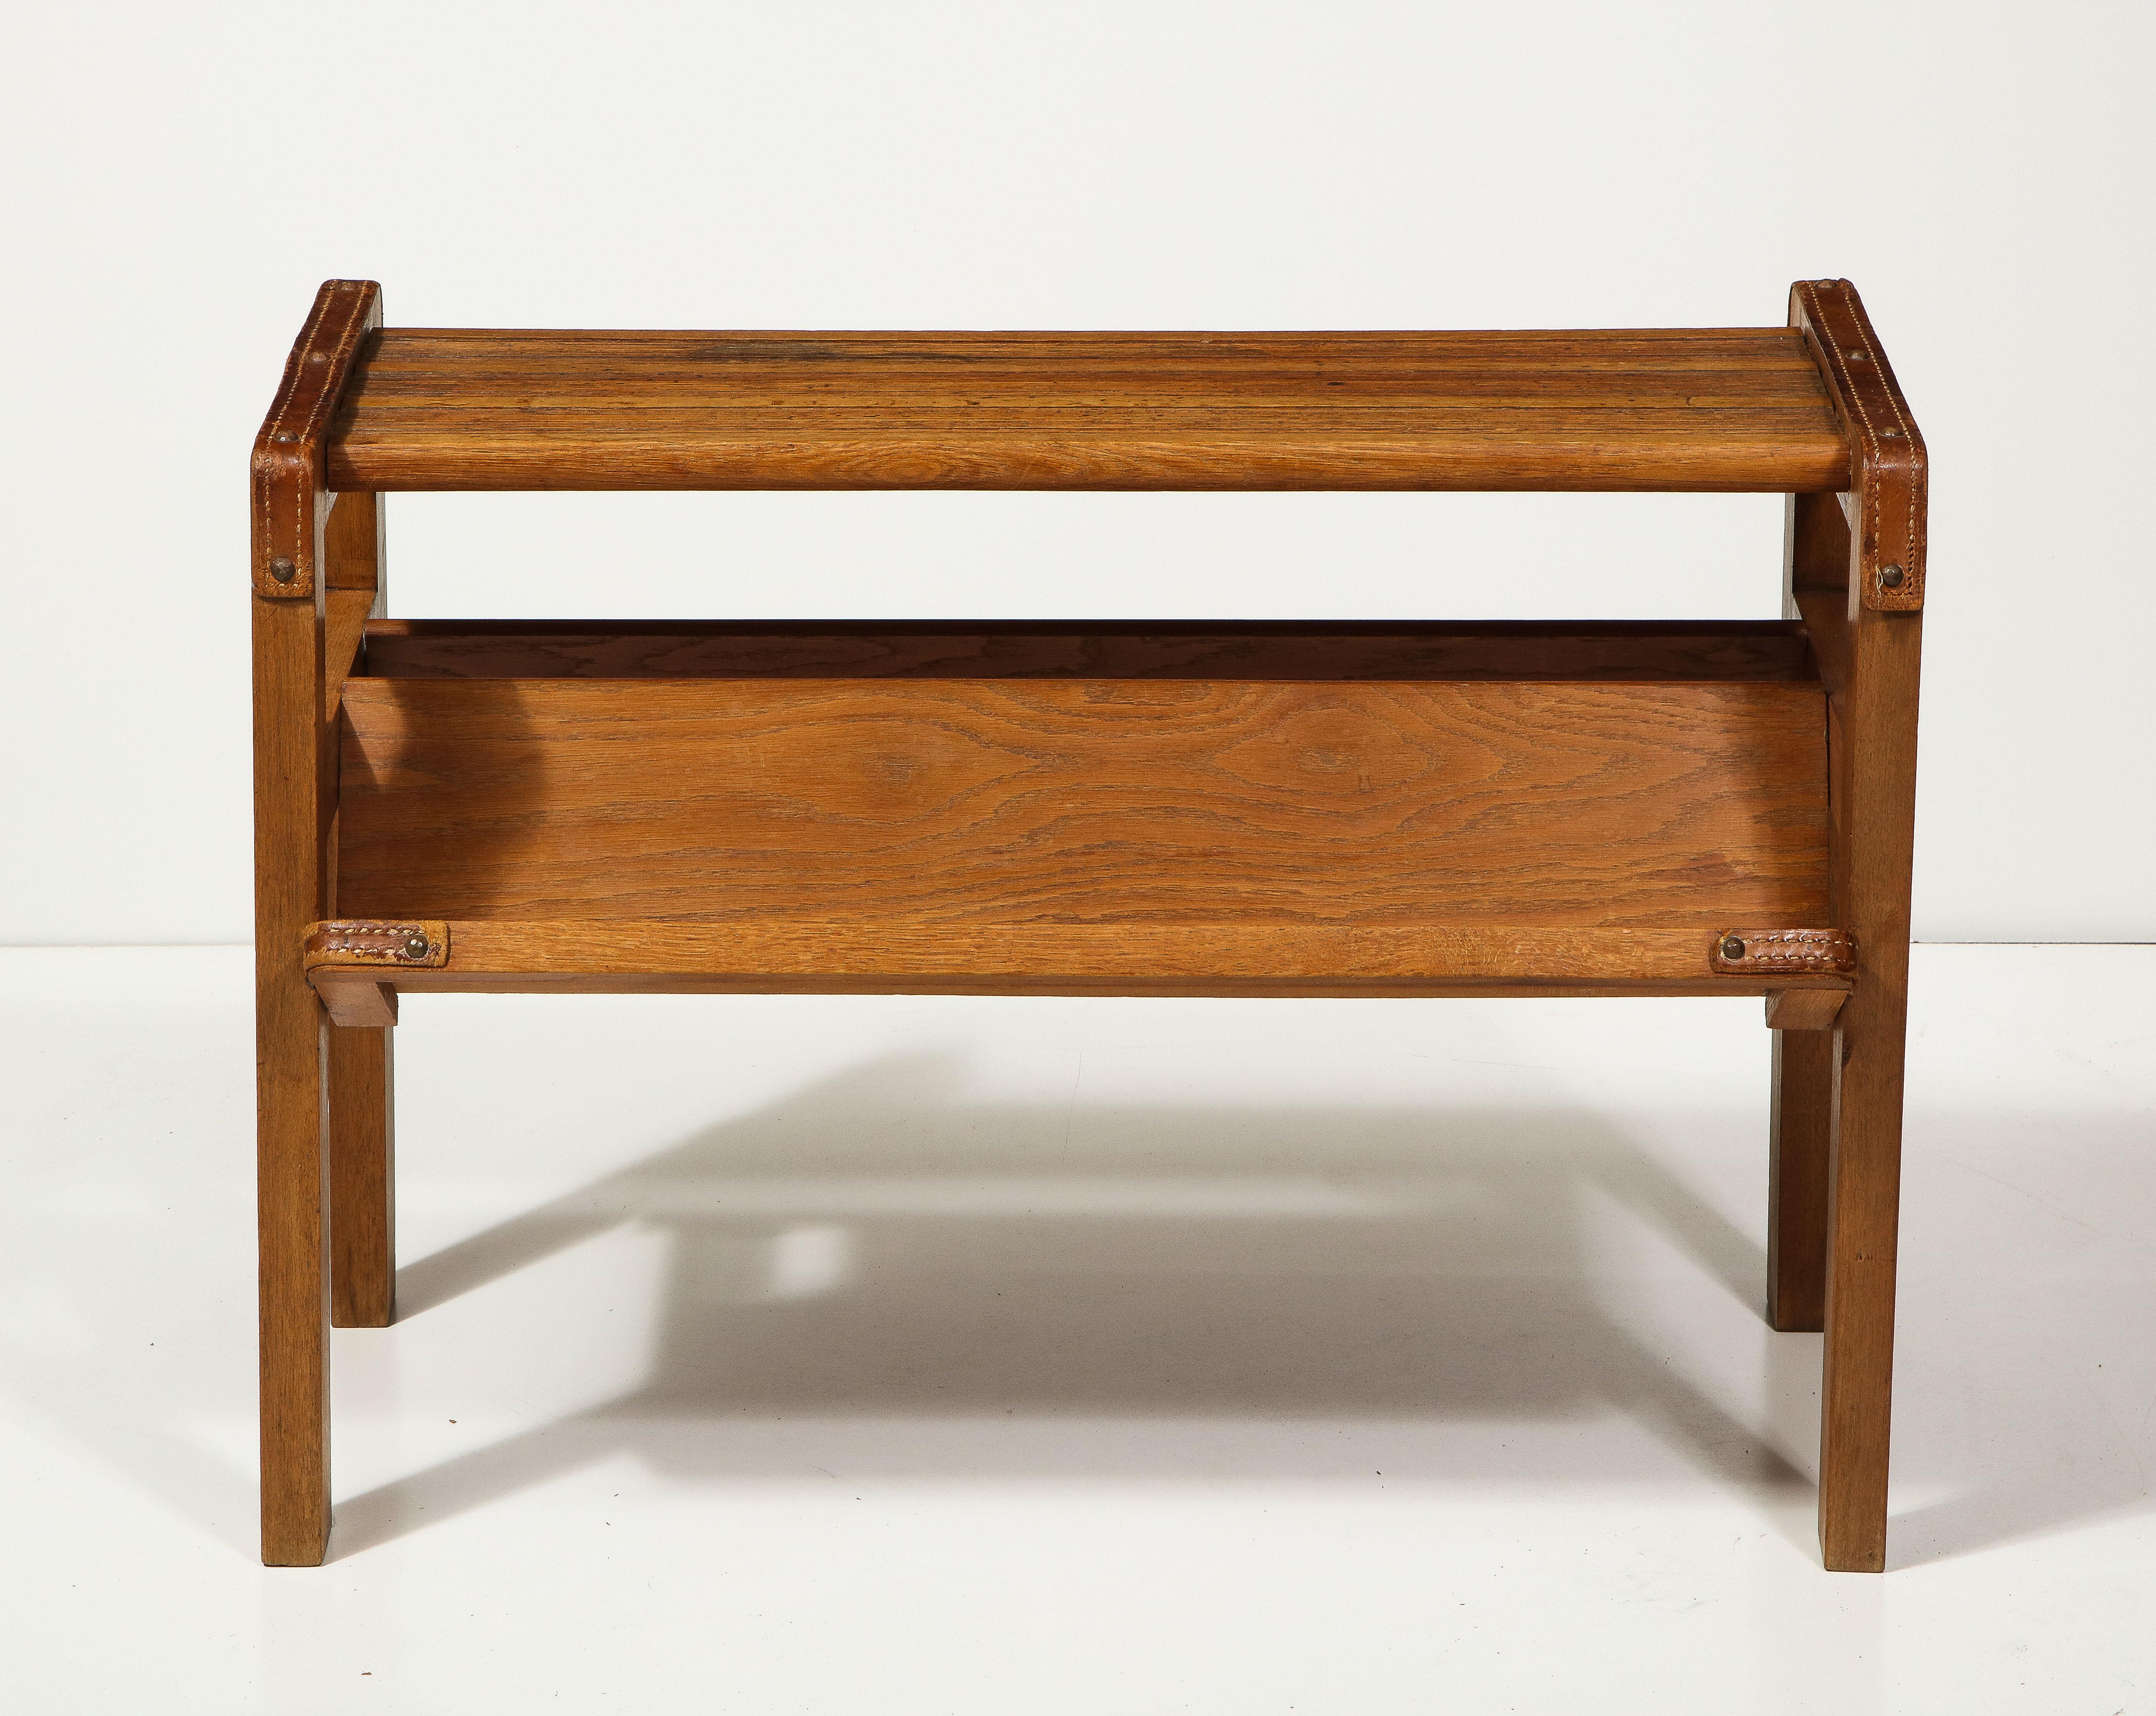 Oak and leather magazine rack by Jacques Adnet, France, c. mid-20th century.

This iconic magazine rack consists of a solid oak construction, an angular frame, and handsome leather details typical of Adnet's design.